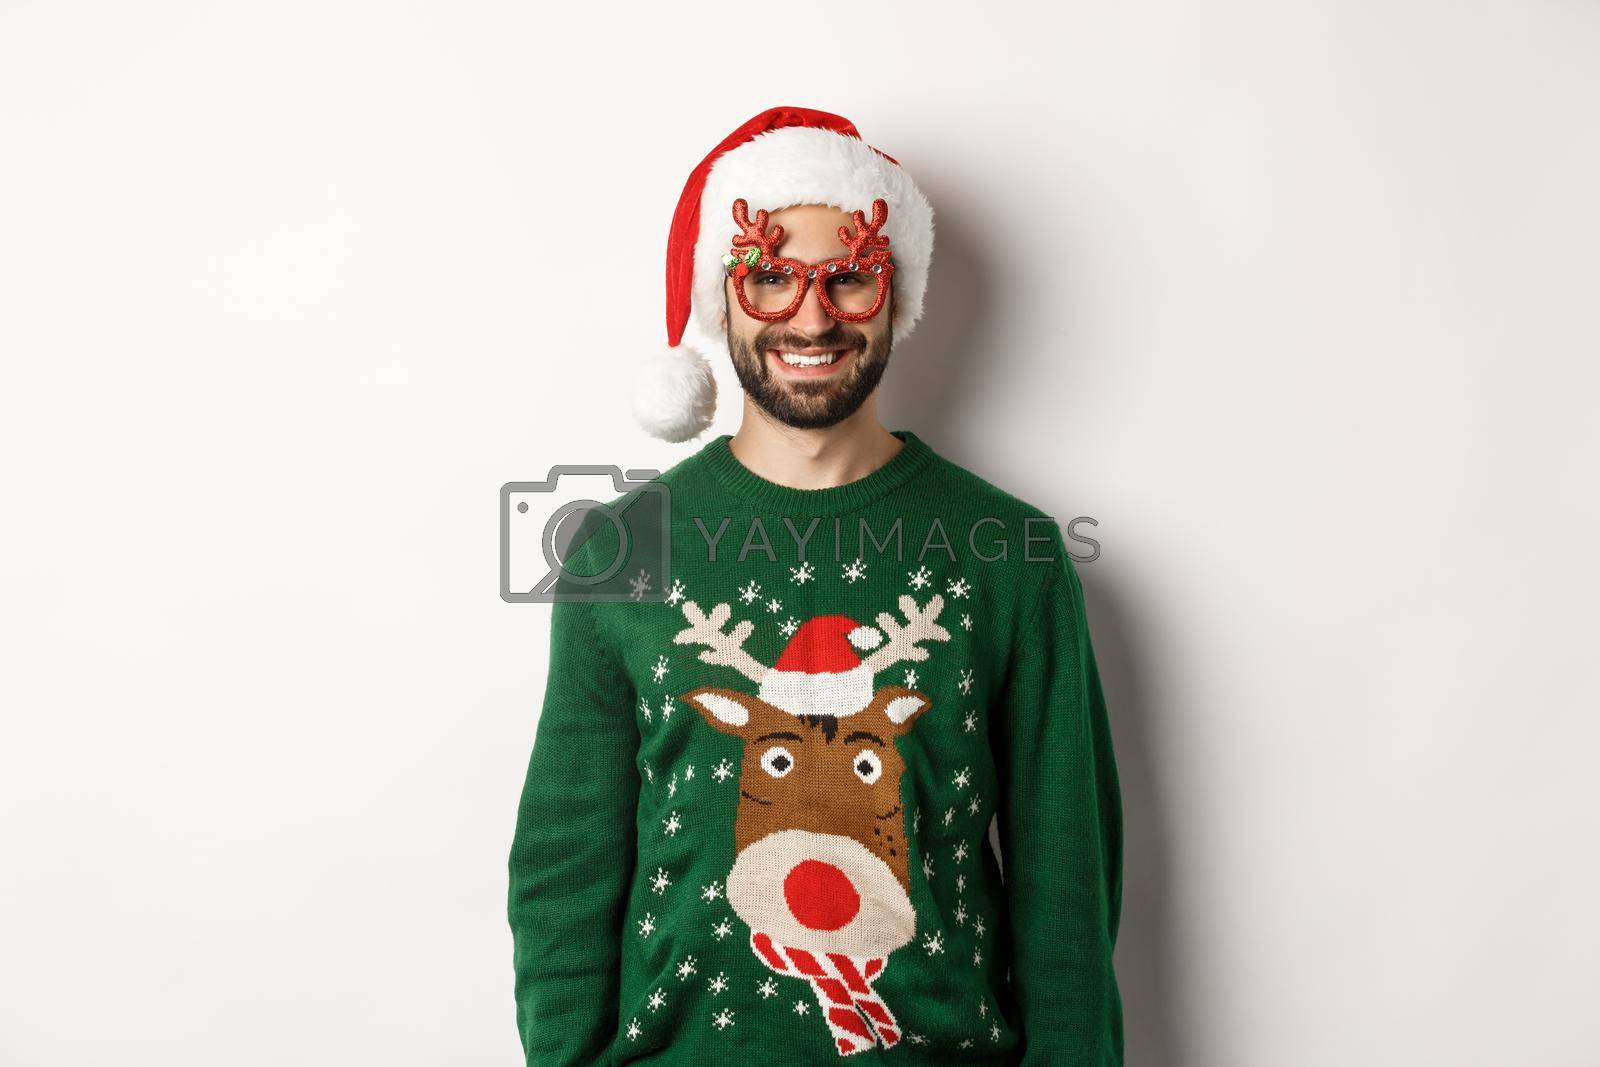 Christmas holidays, celebration concept. Happy man in Santa hat and funny party glasses standing against white background.